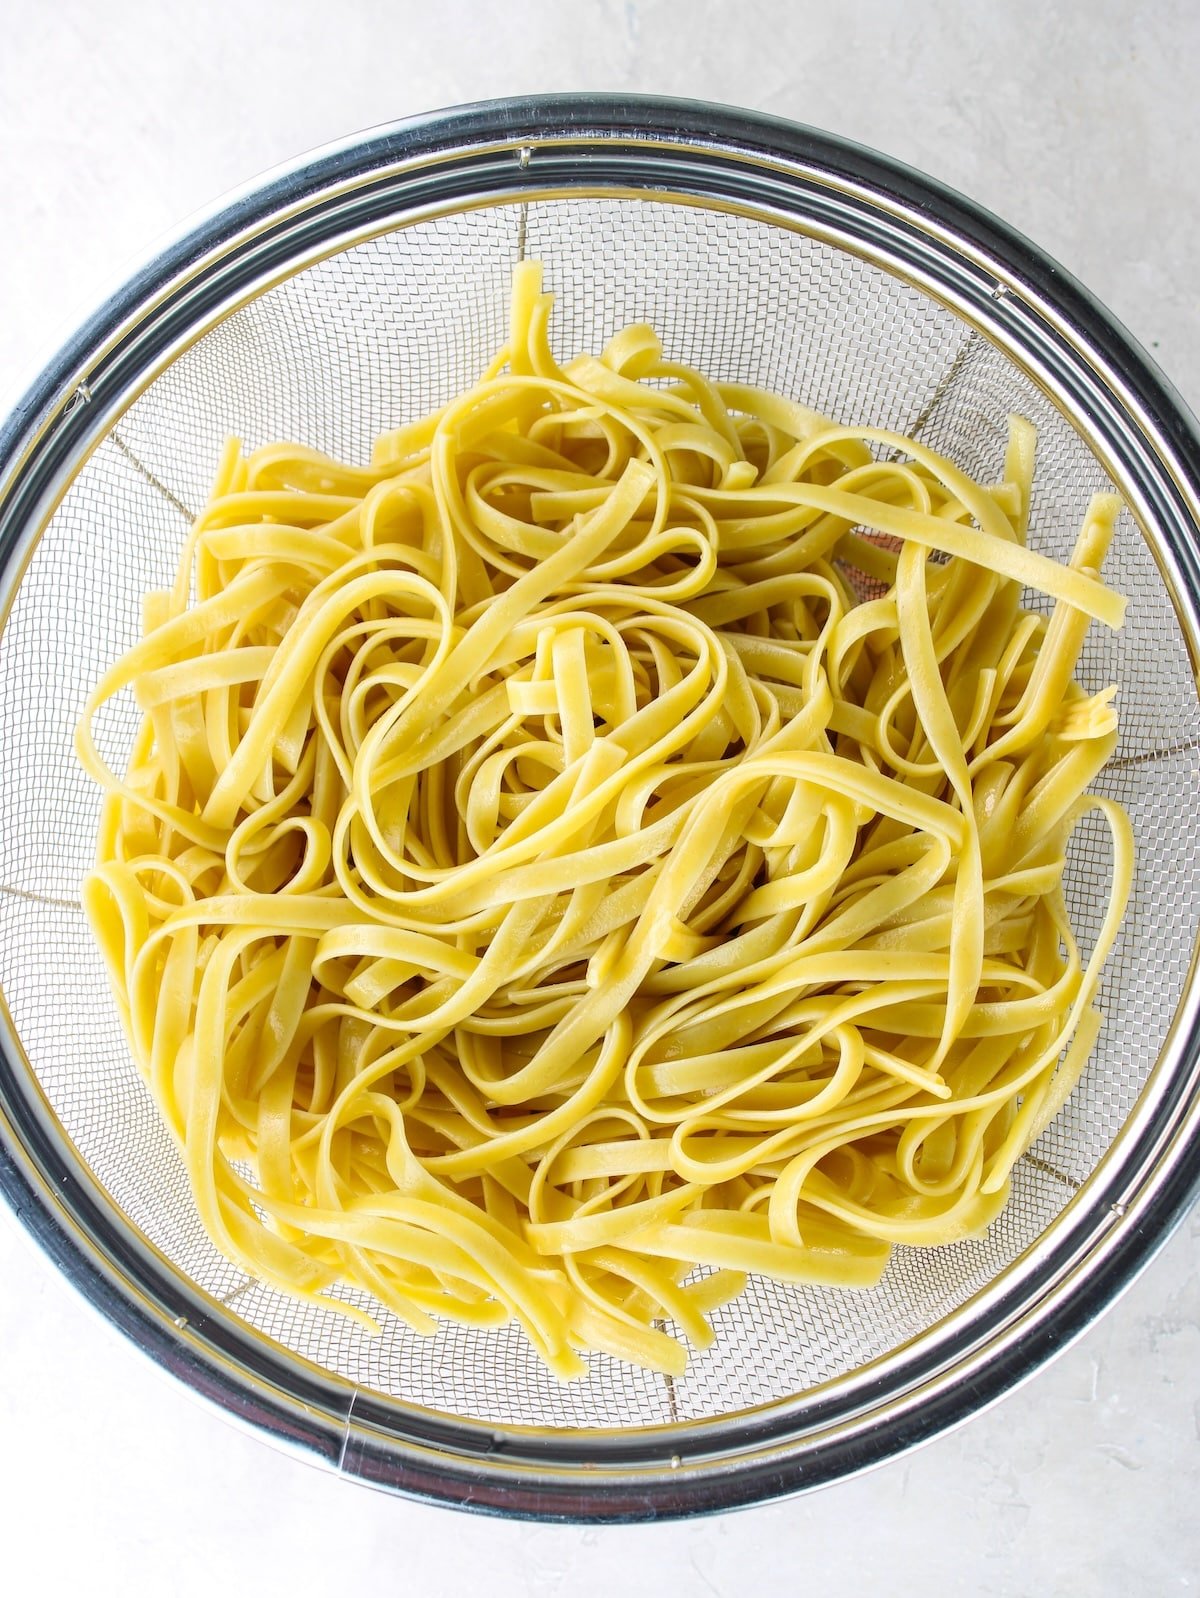 Fettuccine pasta drained in a colander.